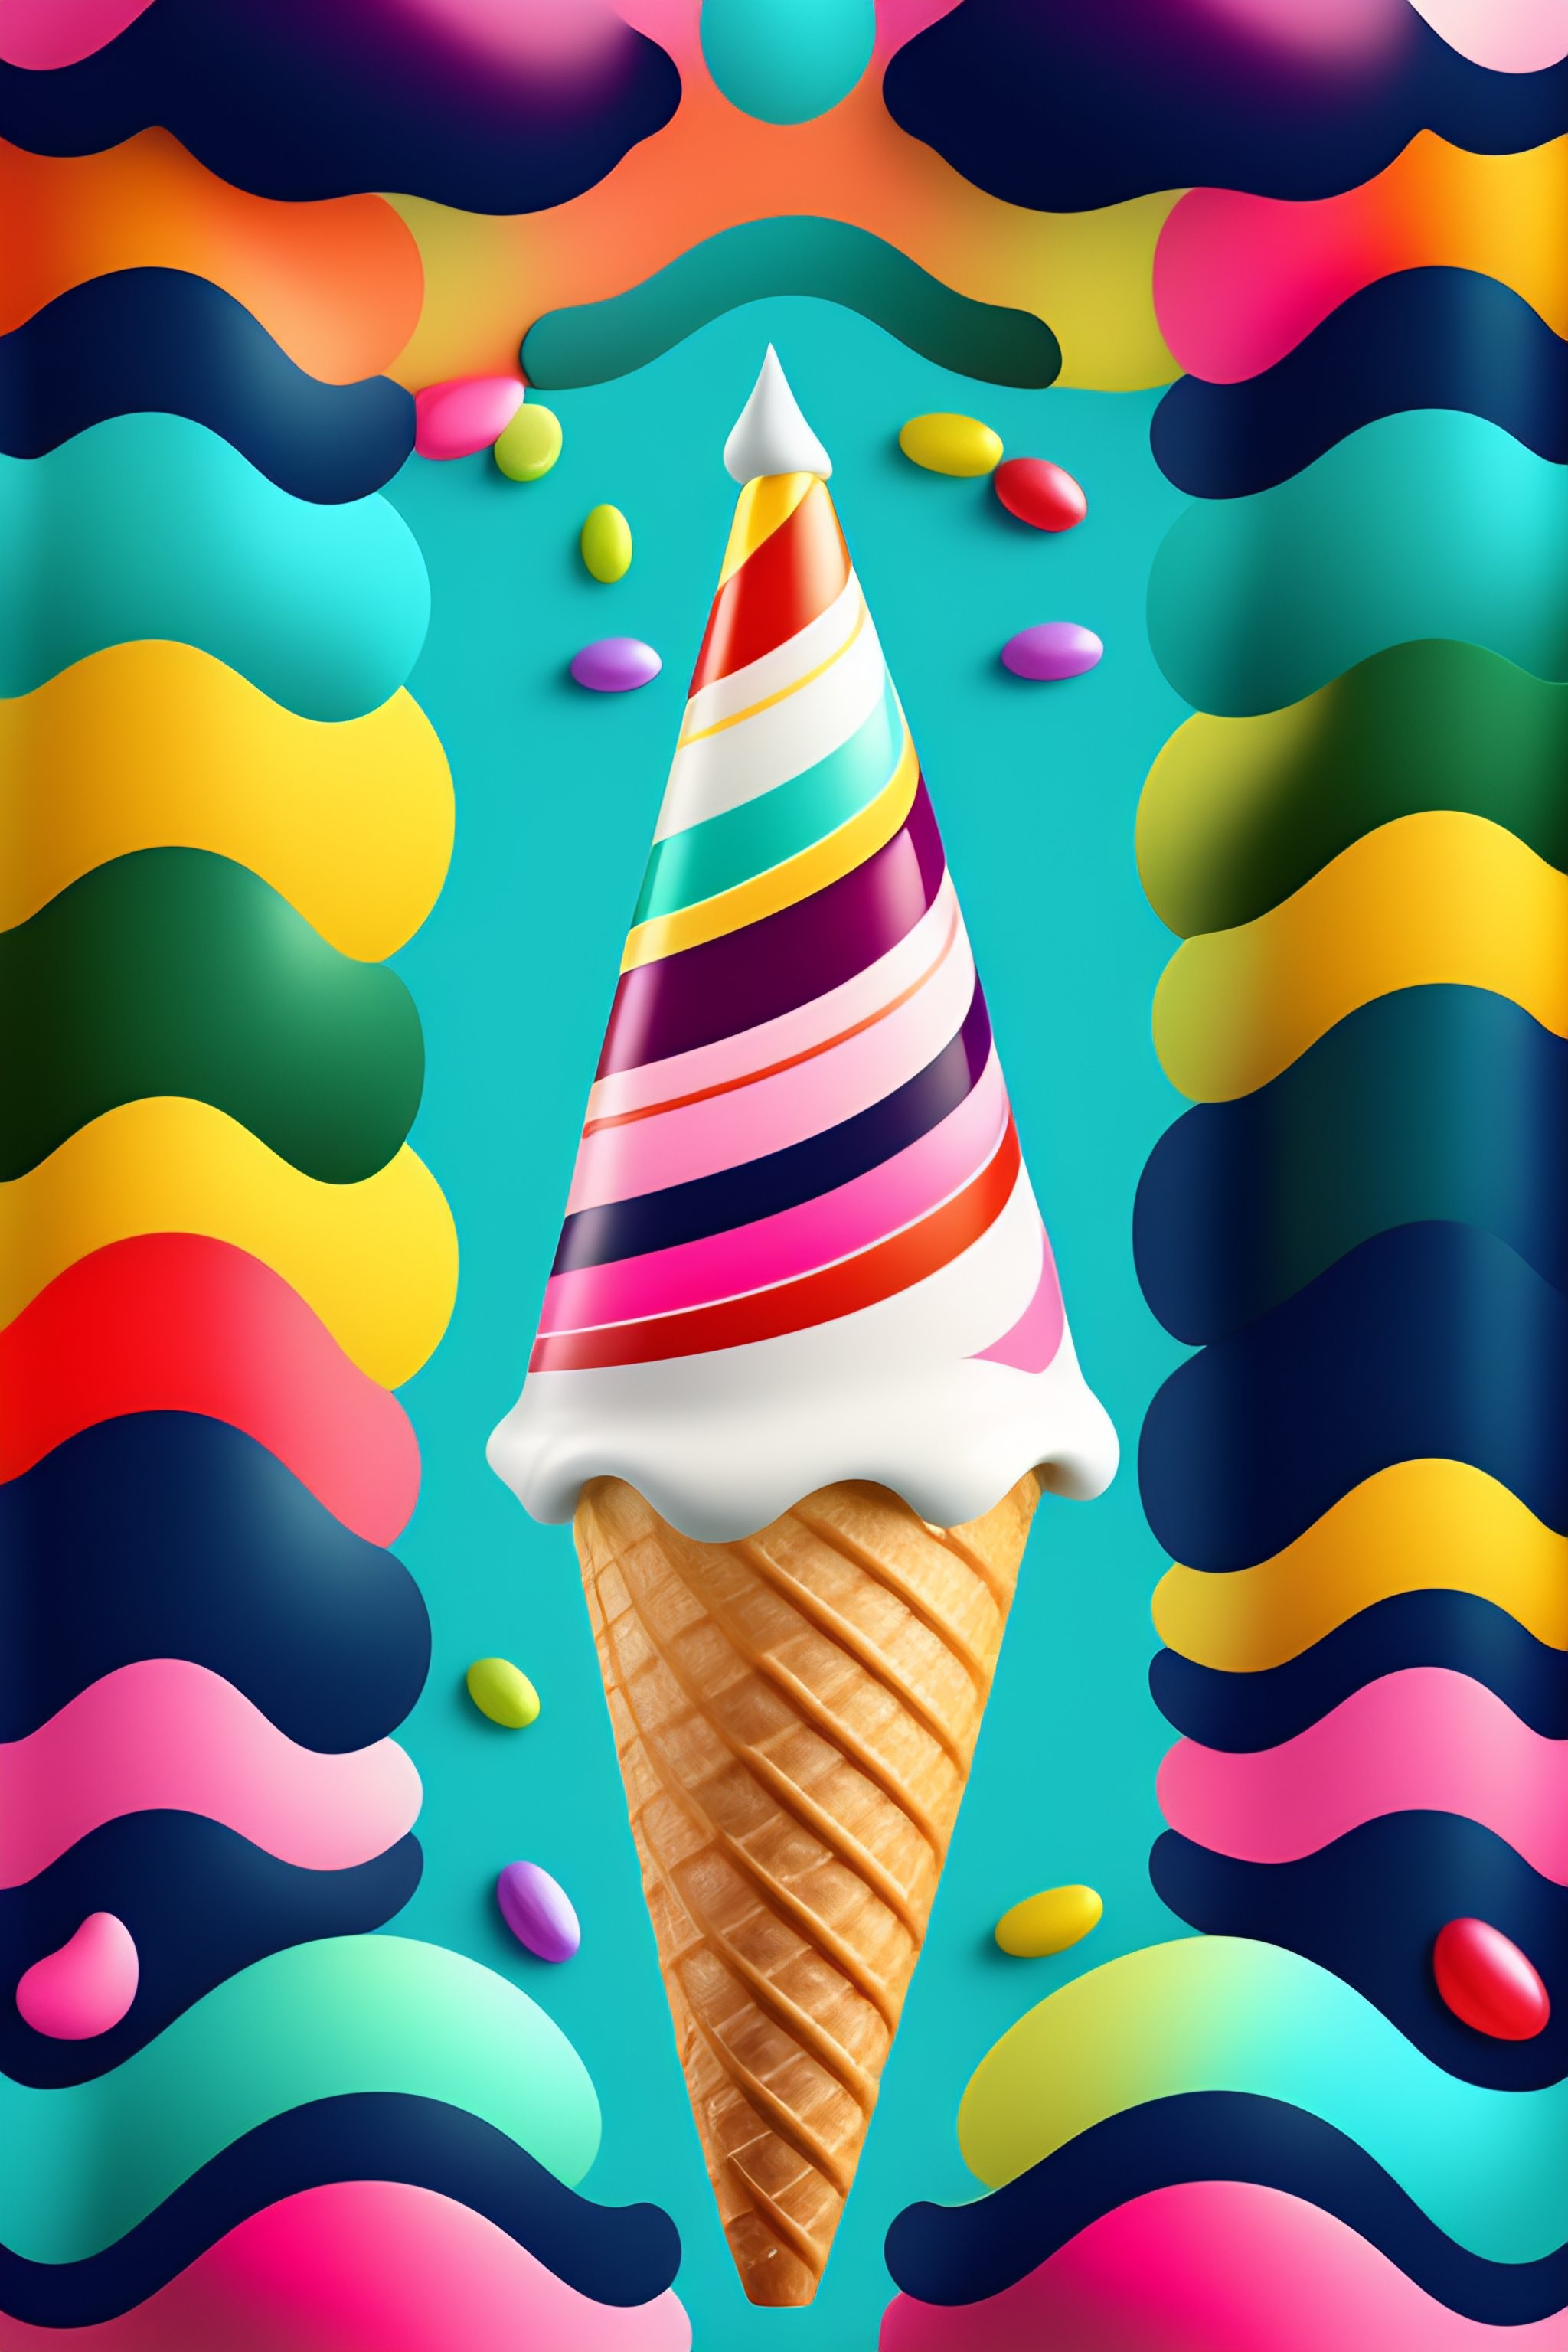 Lexica Create An Abstract Modern Pattern Of An Ice Cream Cone With Sprinkles Using Adobe 